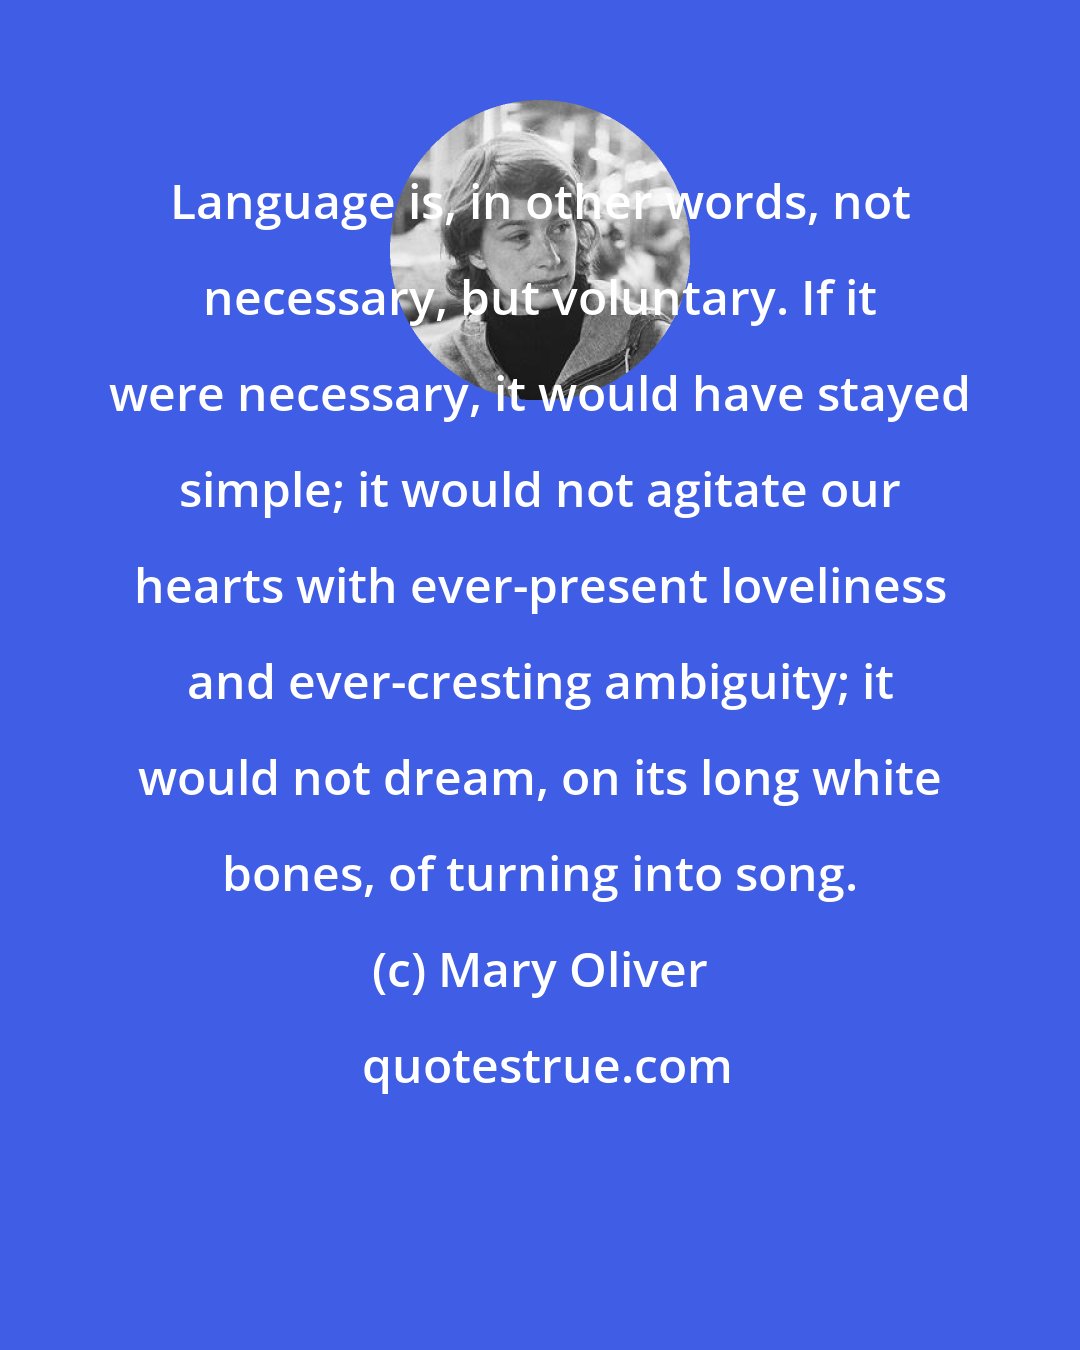 Mary Oliver: Language is, in other words, not necessary, but voluntary. If it were necessary, it would have stayed simple; it would not agitate our hearts with ever-present loveliness and ever-cresting ambiguity; it would not dream, on its long white bones, of turning into song.